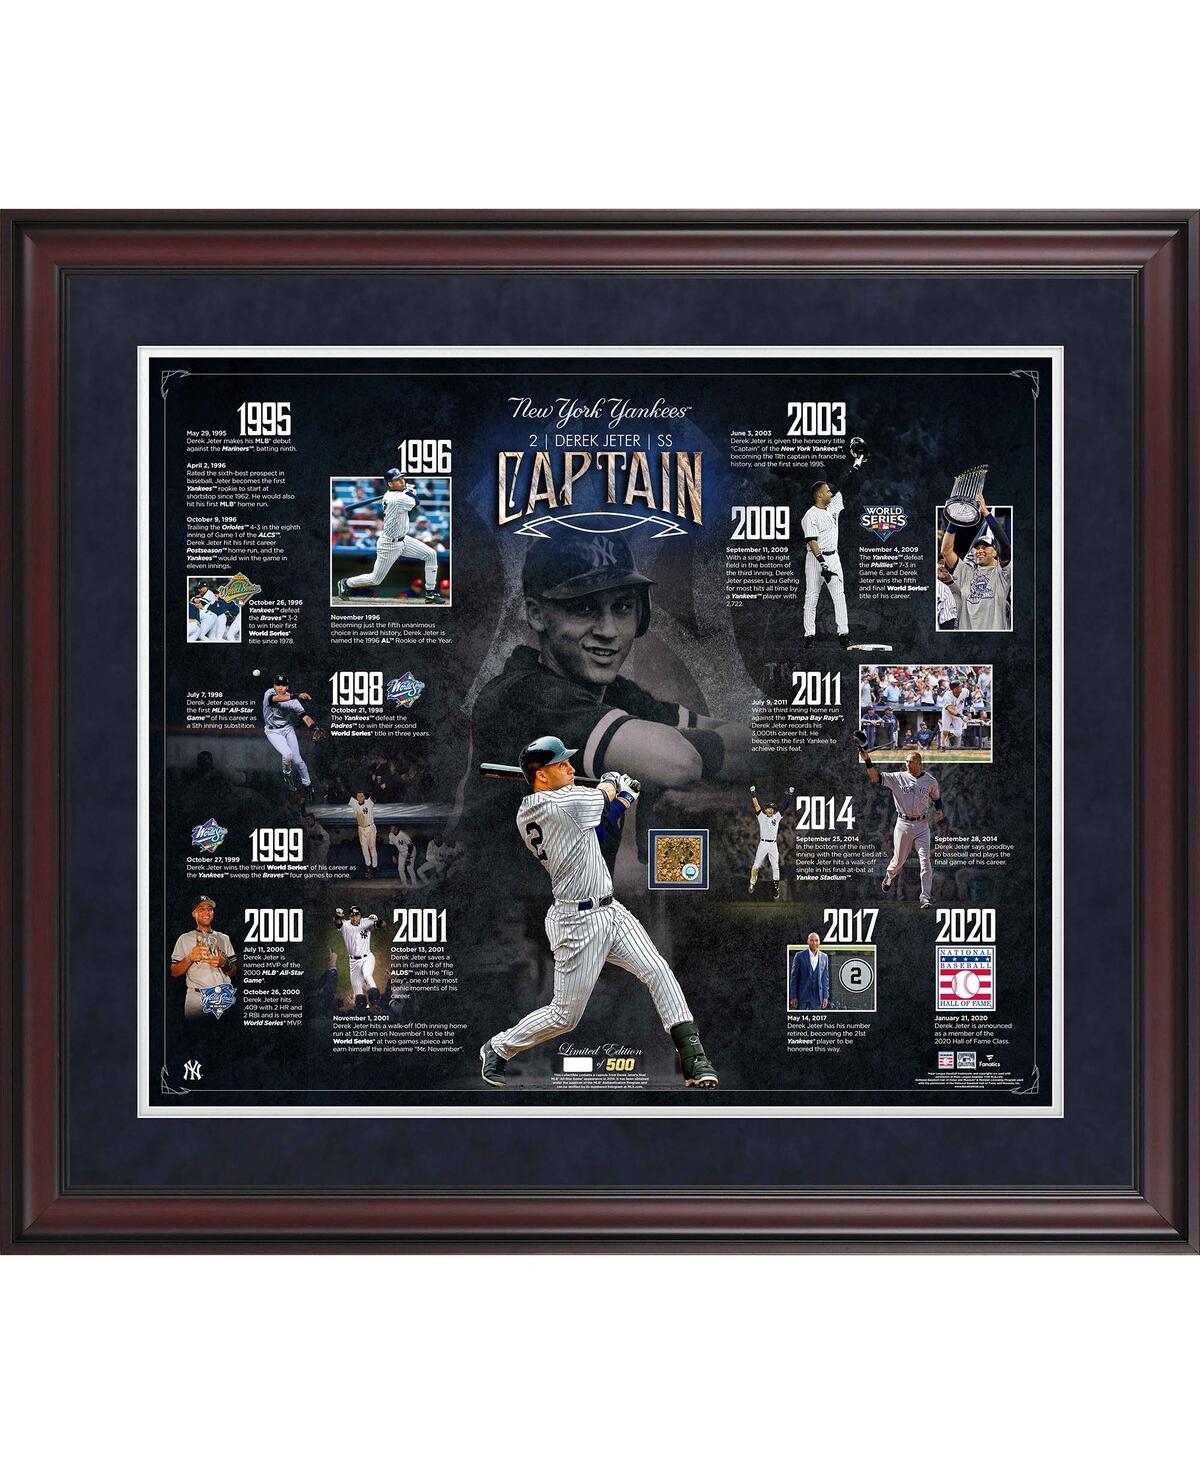 Fanatics Authentic Derek Jeter New York Yankees Framed 20'' X 24'' Career Timeline Collage With A Capsule Of Game-used In Navy,brown